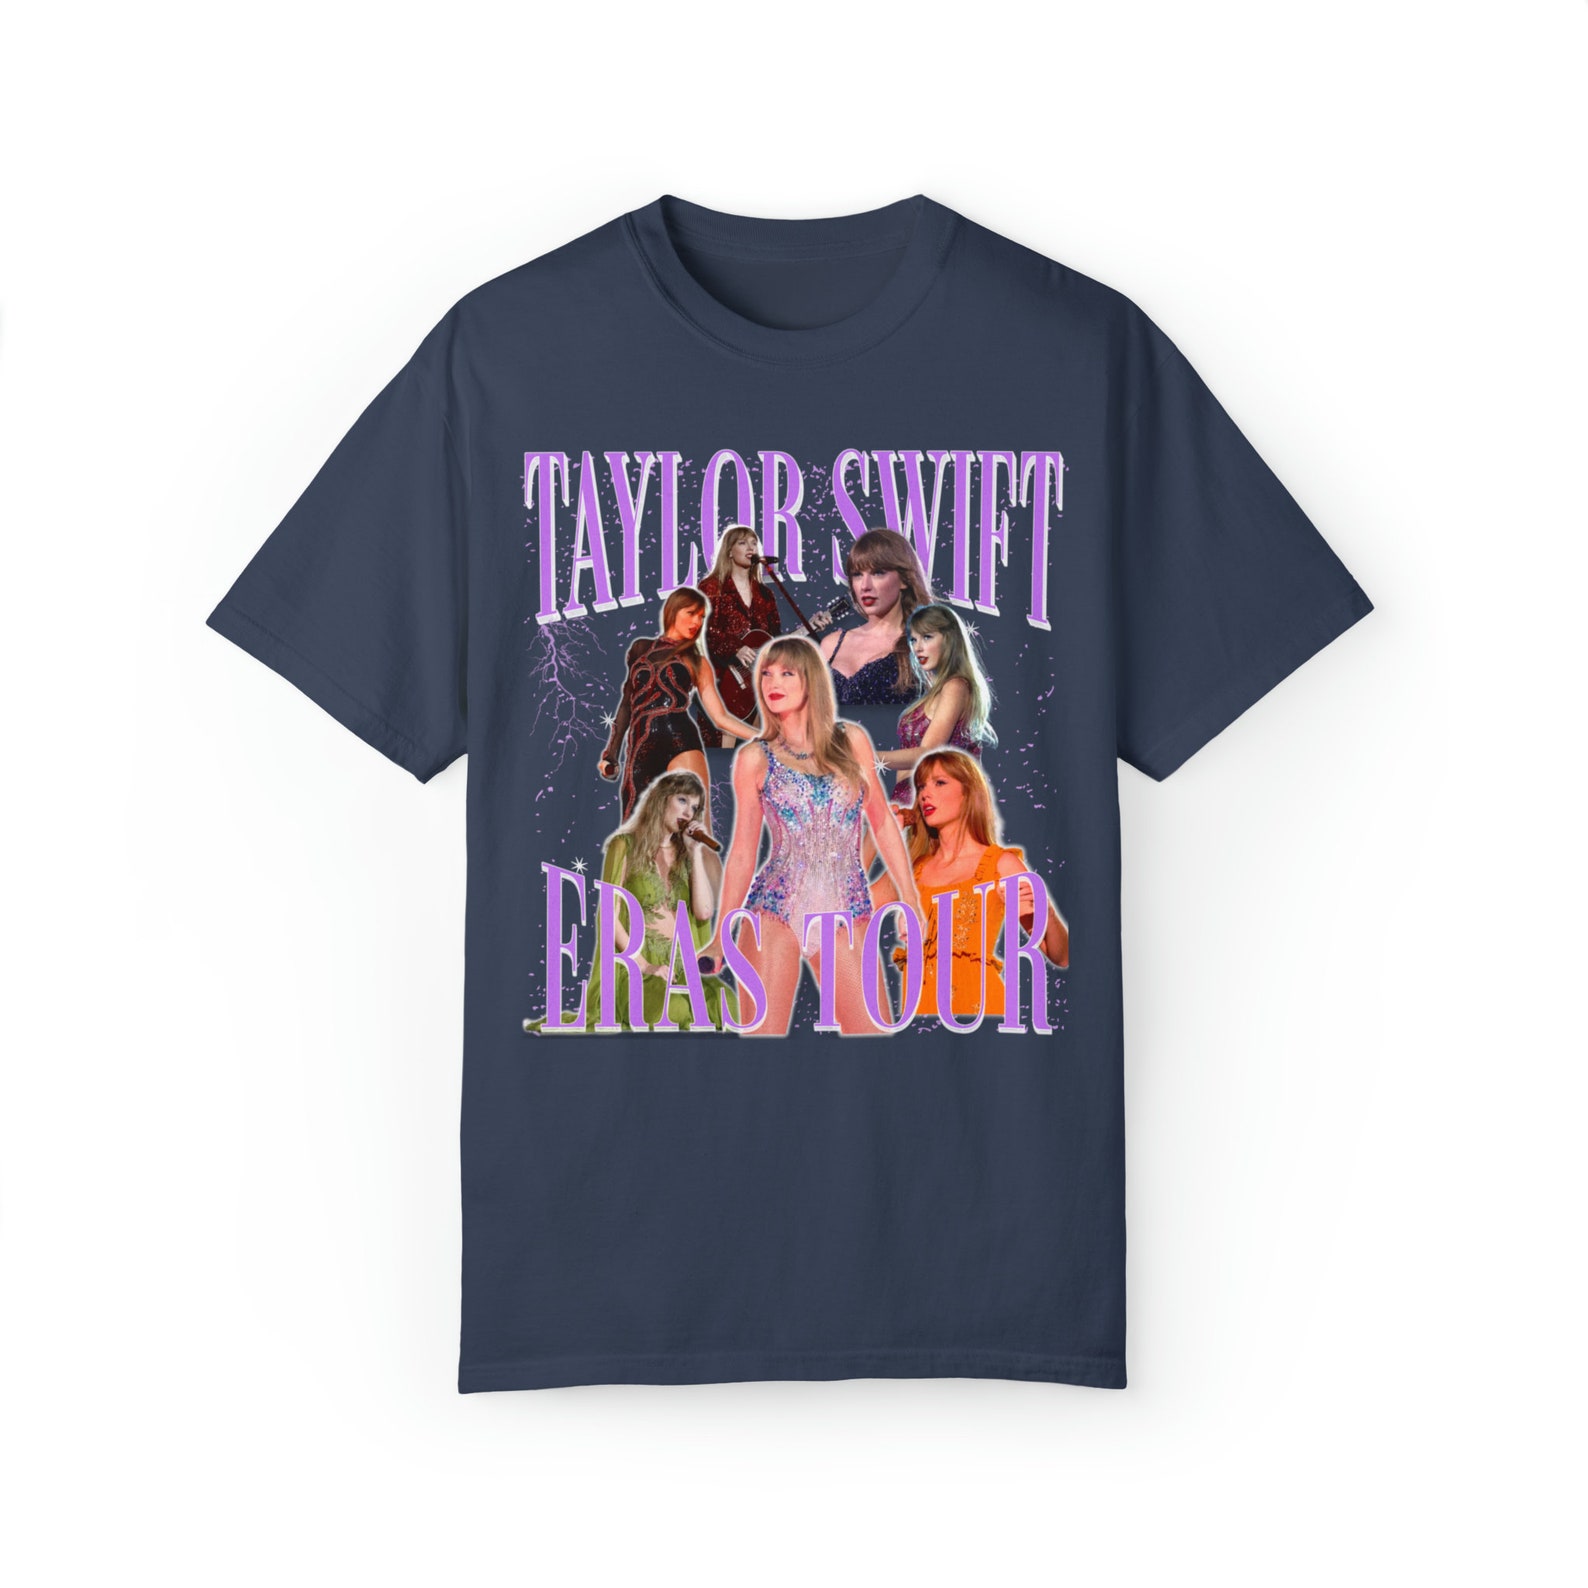 Taylor Swift The Eras Tour merchandise for Cardiff gig you can already buy  from just £10 - Wales Online